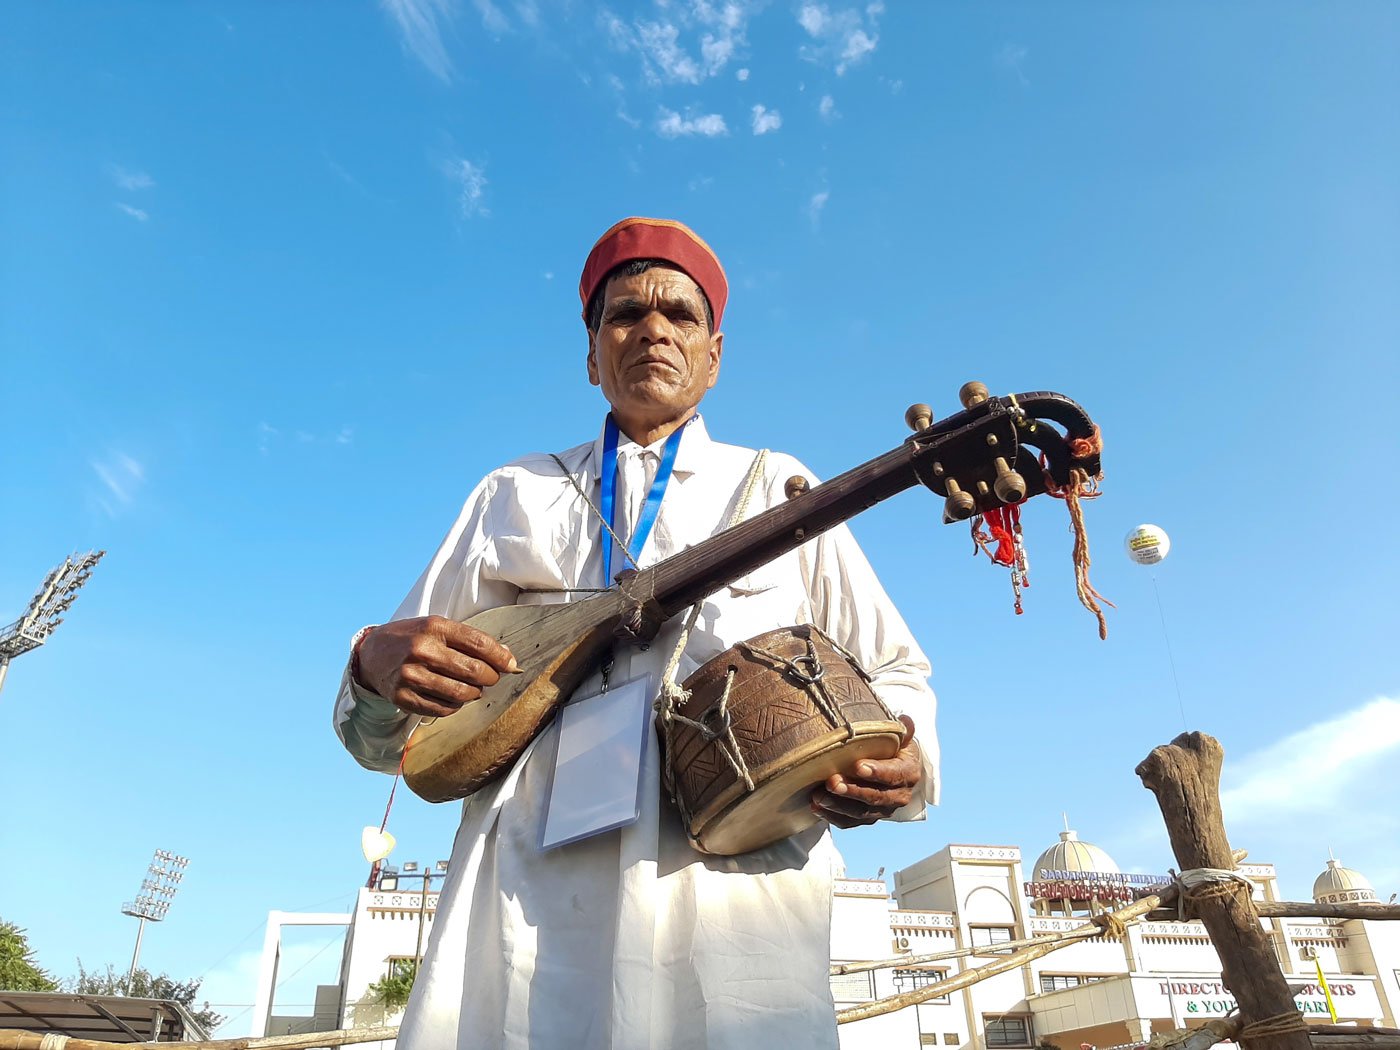 Premlal, a farmer-musician from Chamba district, performing at a recent festival